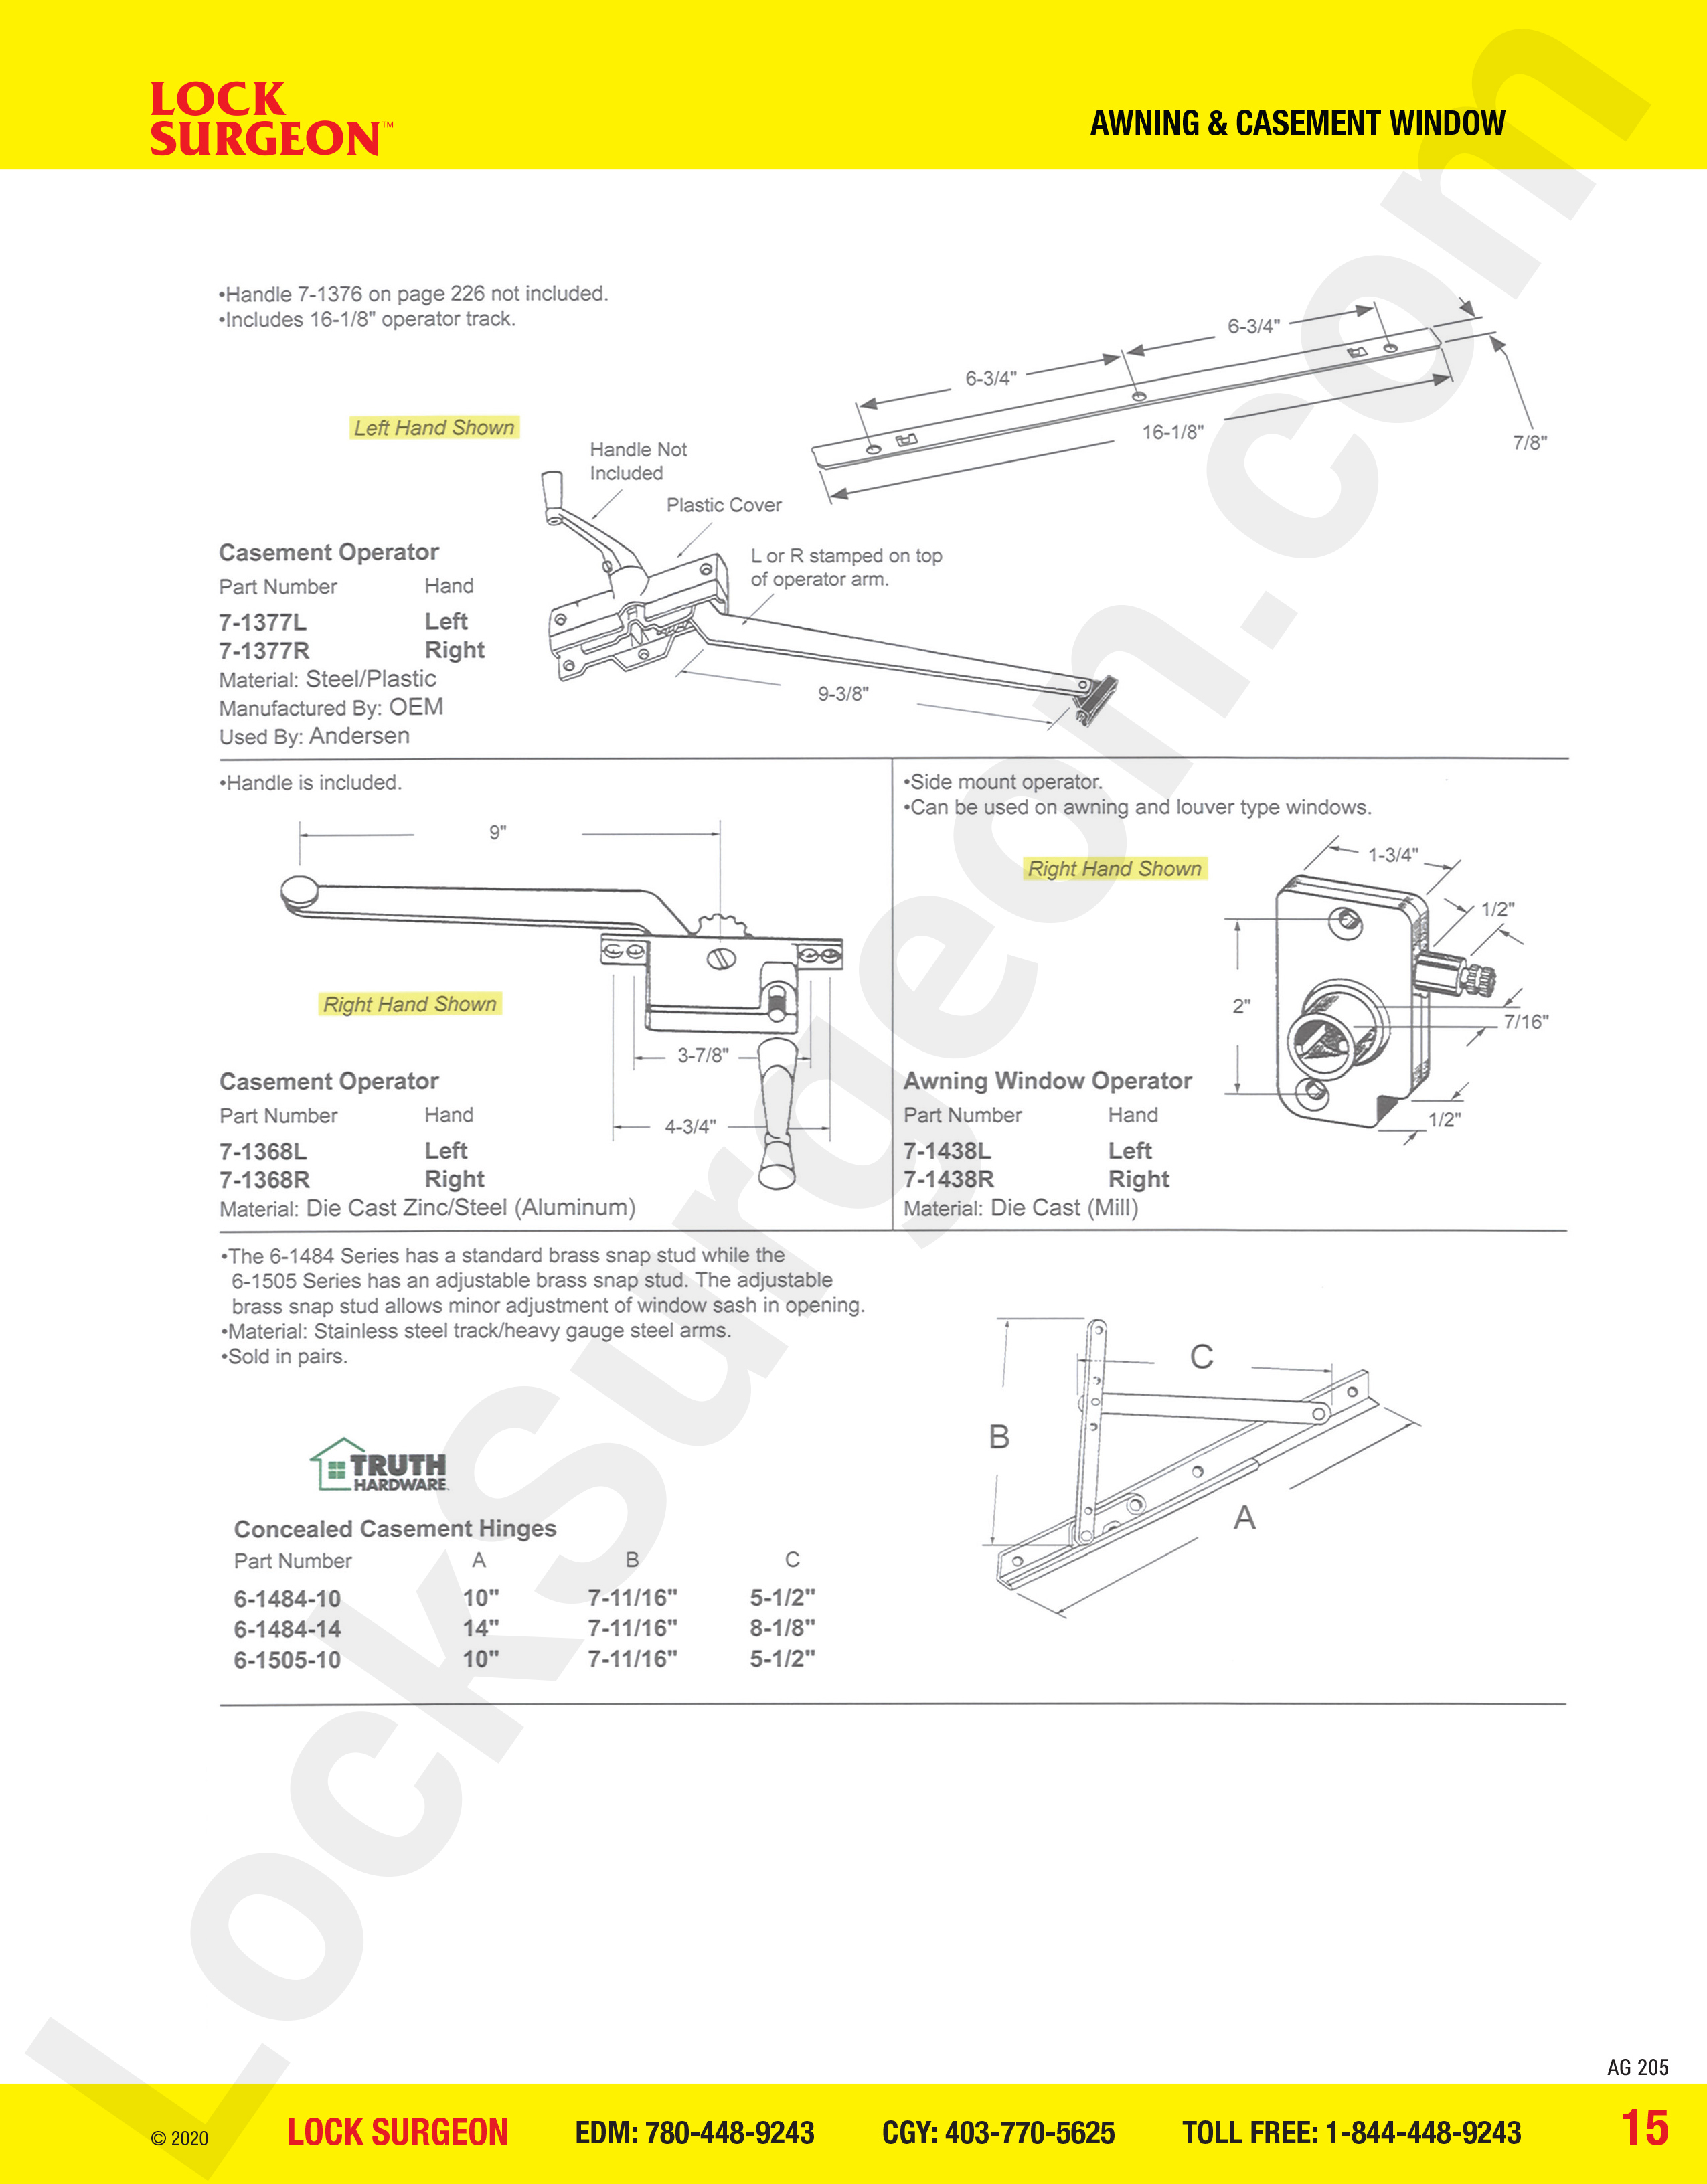 awning and casement window parts for casement operators & concealed casement hinges.